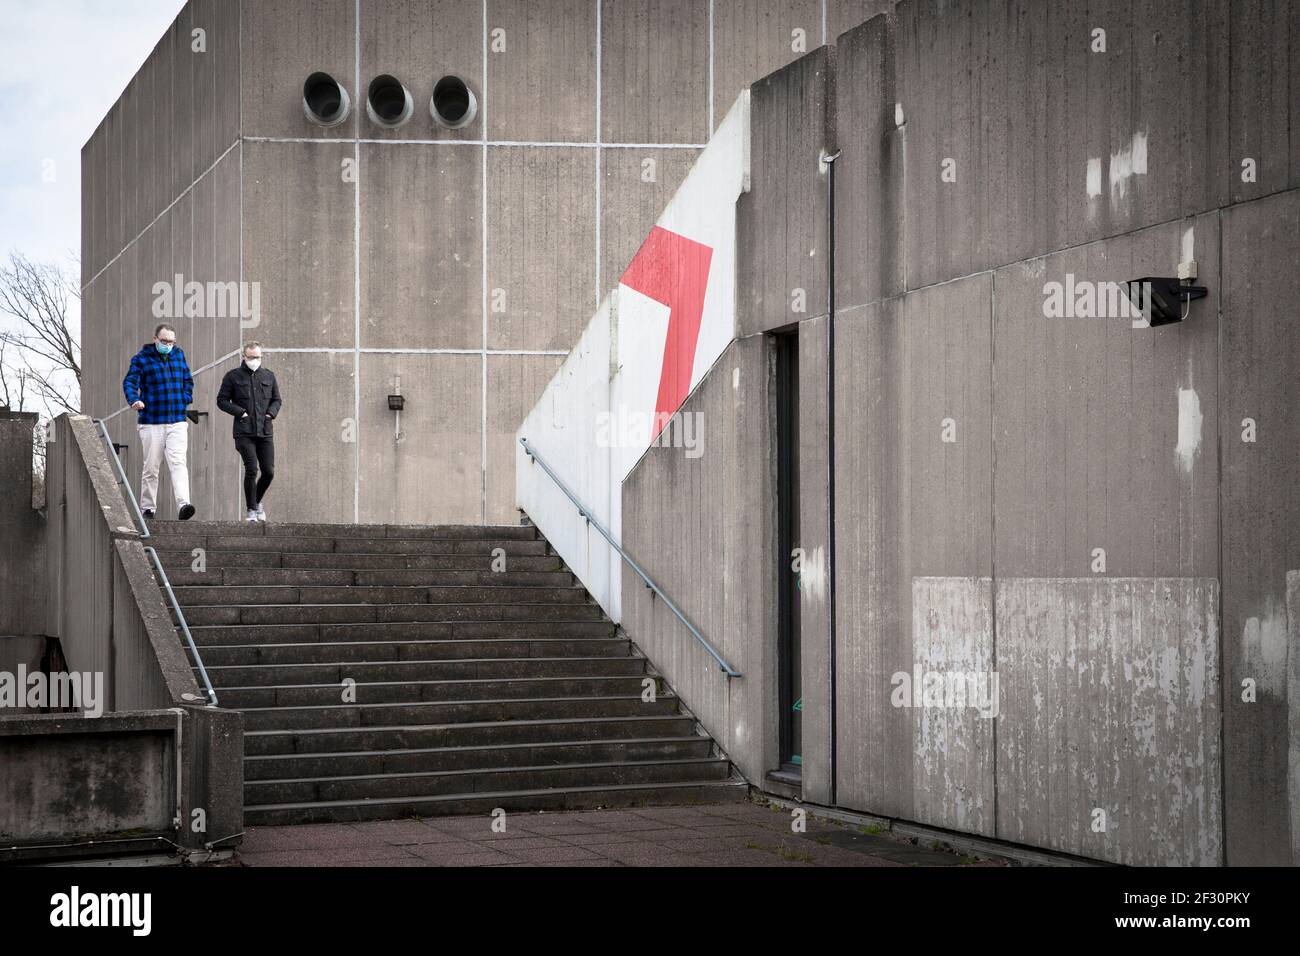 Ruhr University Bochum, hardly any students on campus during the Corona pandemic, stairs on campus, concrete buildings, Bochum, North Rhine-Westphalia Stock Photo